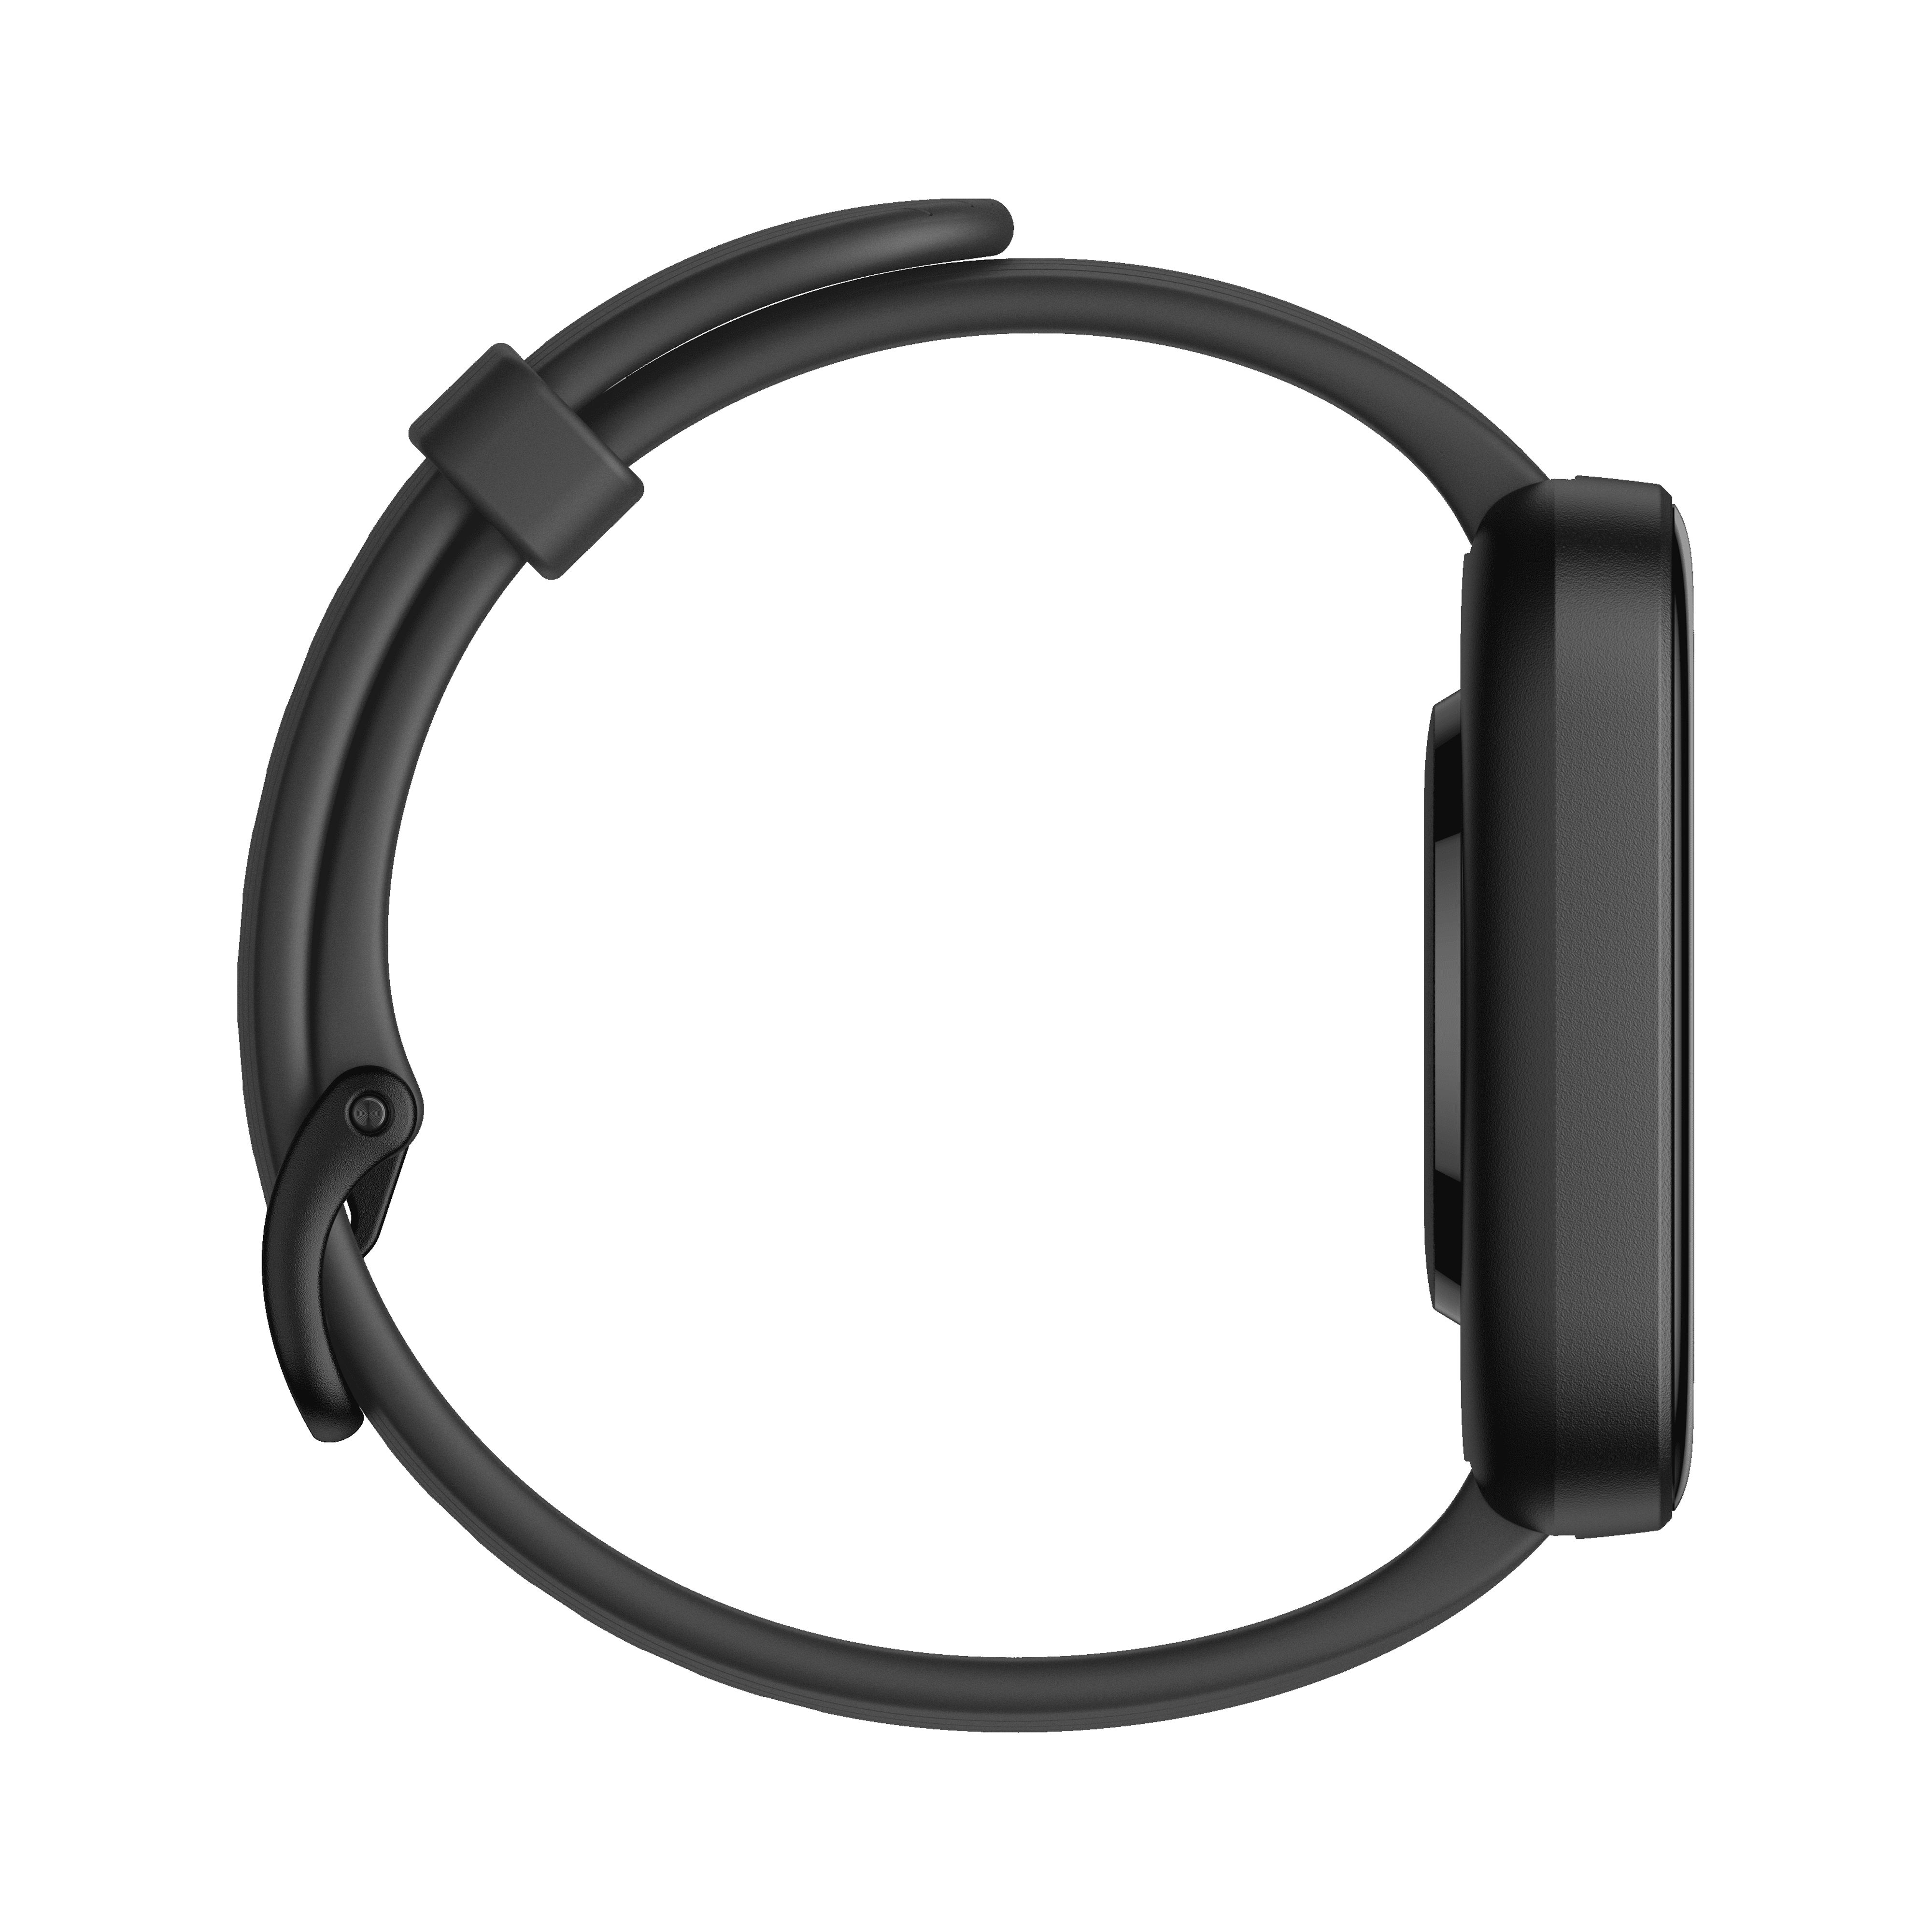 Amazfit Bip 3 Urban Edition Smart Watch: Health & Fitness Tracker - Black Silicon watchband - image 5 of 13